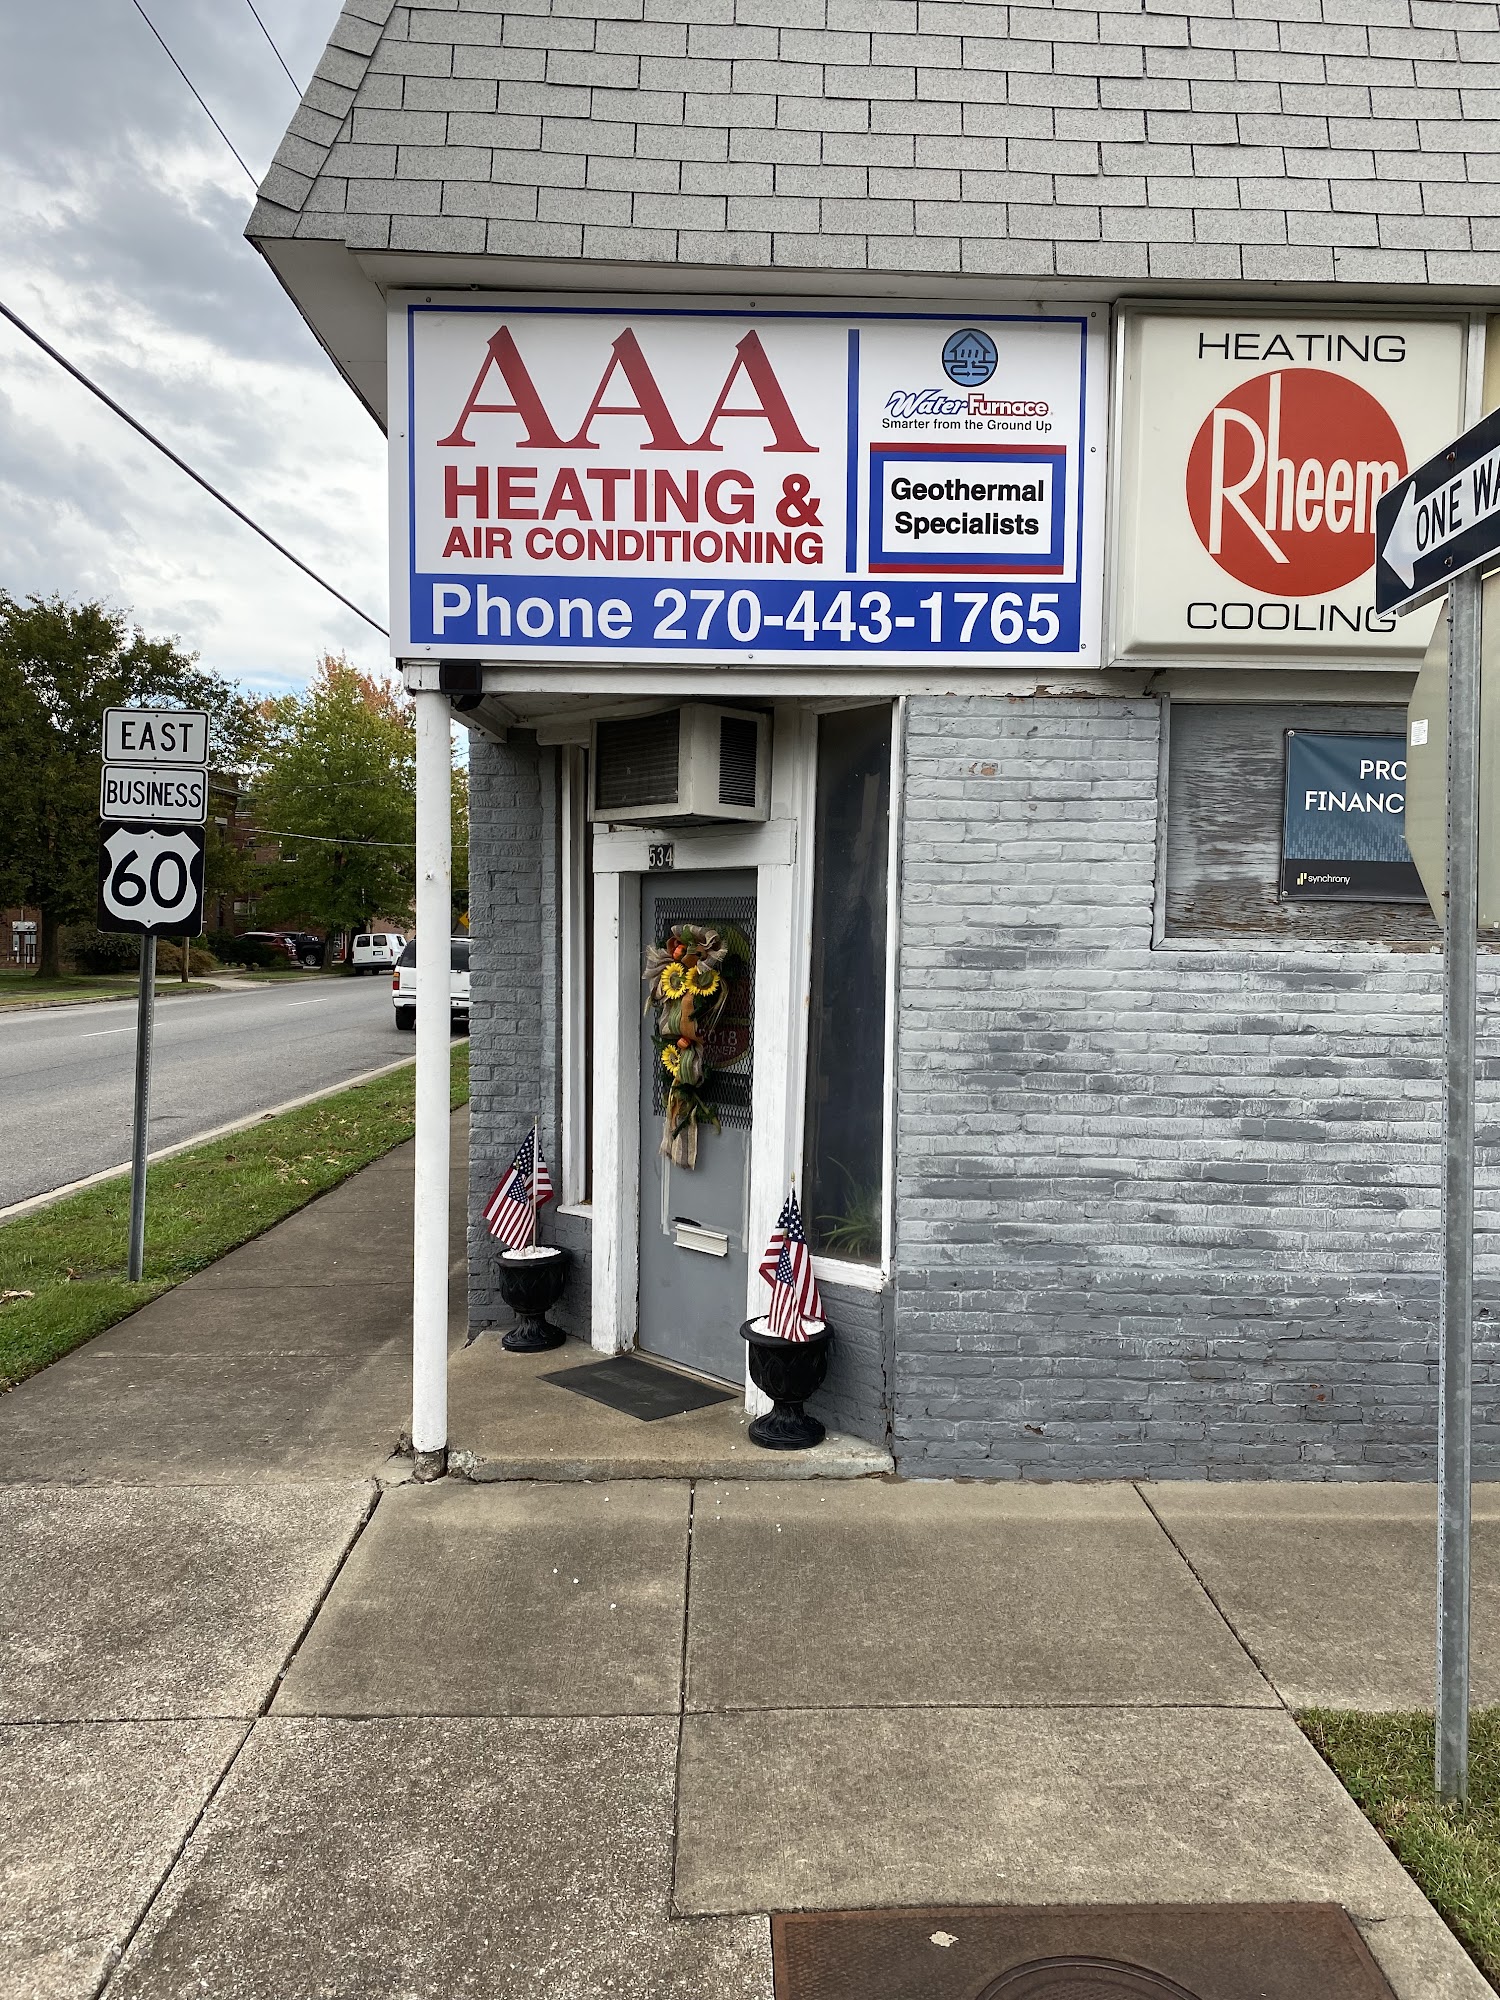 AAA Heating & Air Conditioning Co